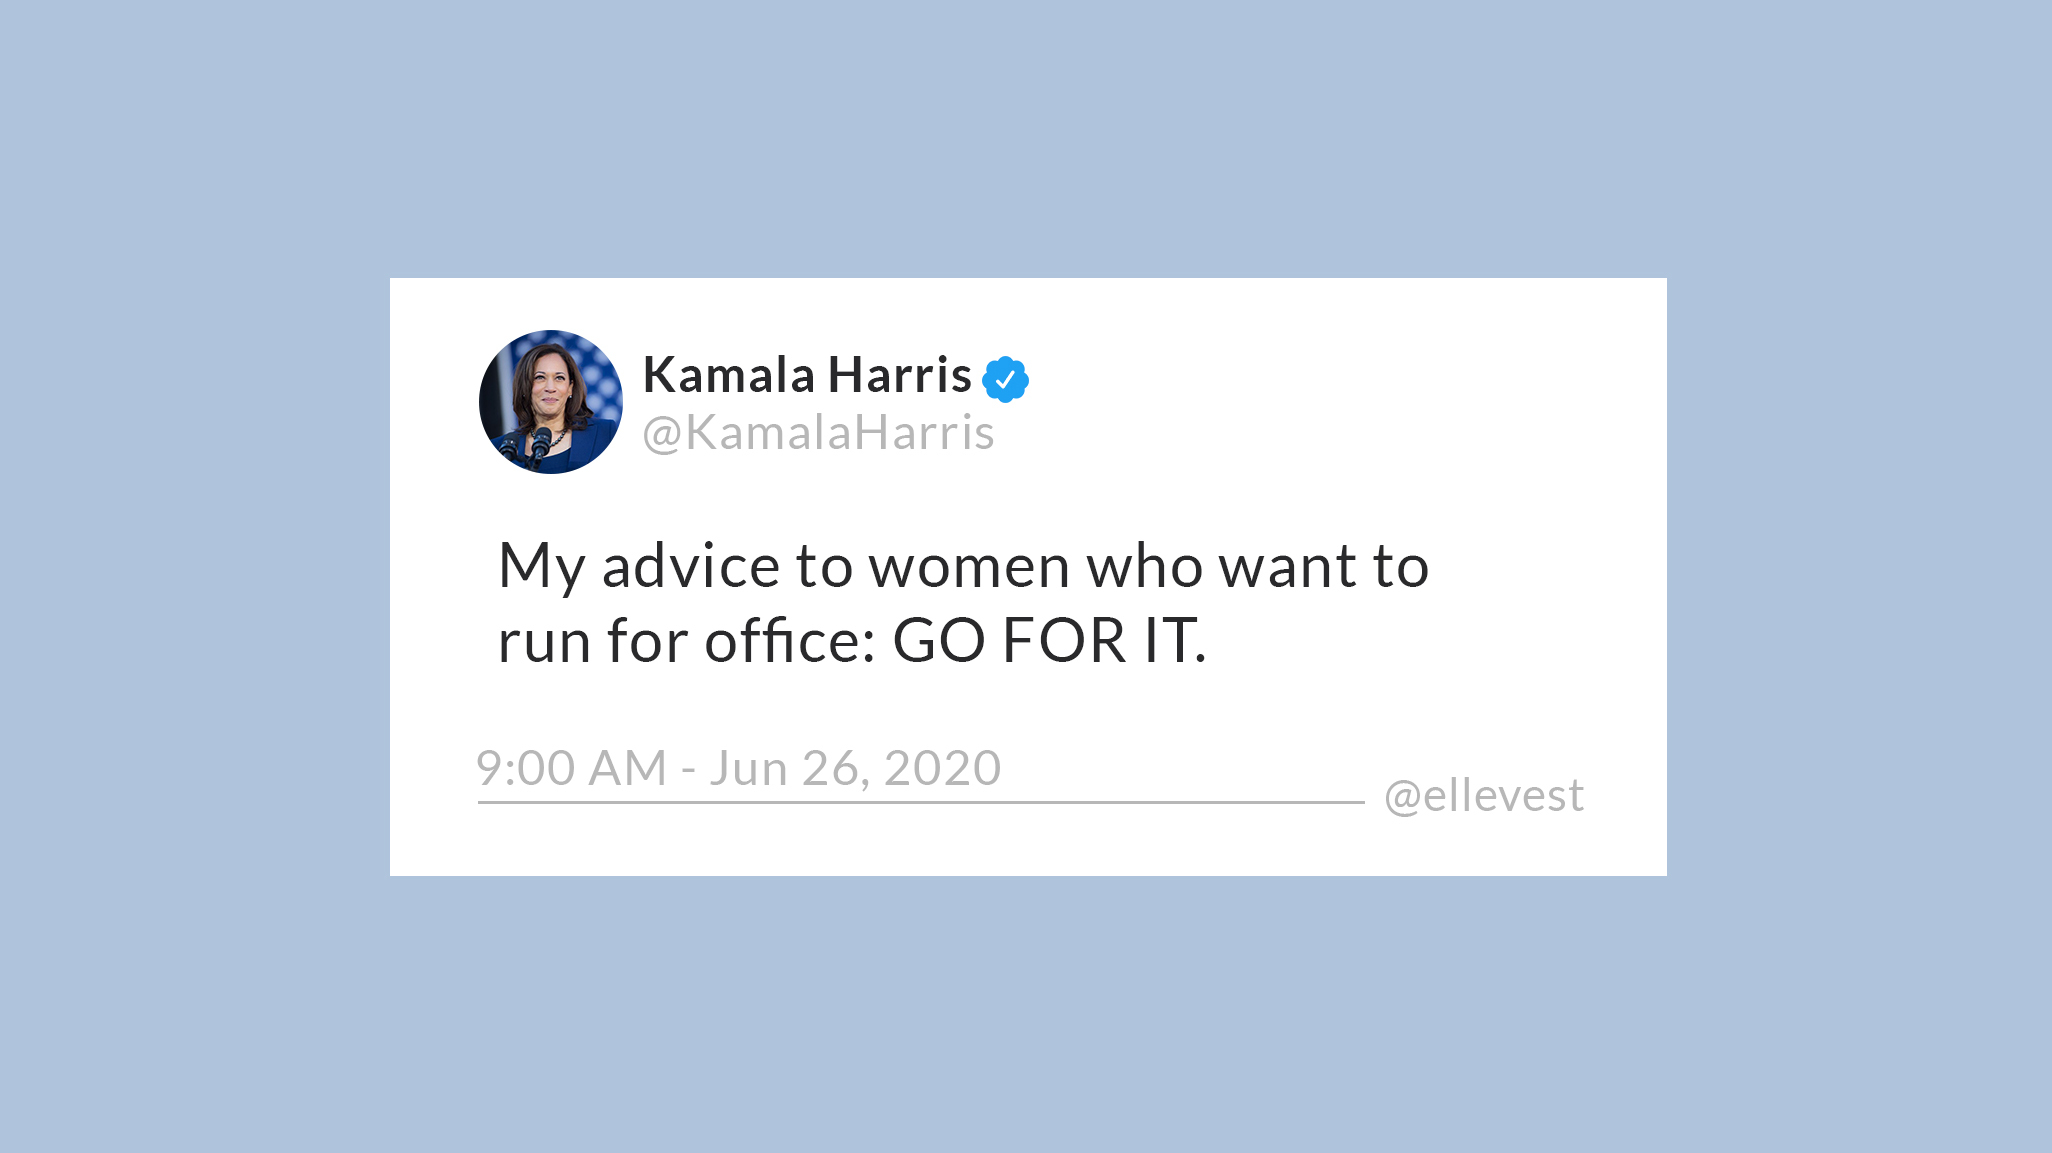 A tweet by Kamala Harris dated June 26, 2020, saying My advice to women who want to run for office: GO FOR IT.